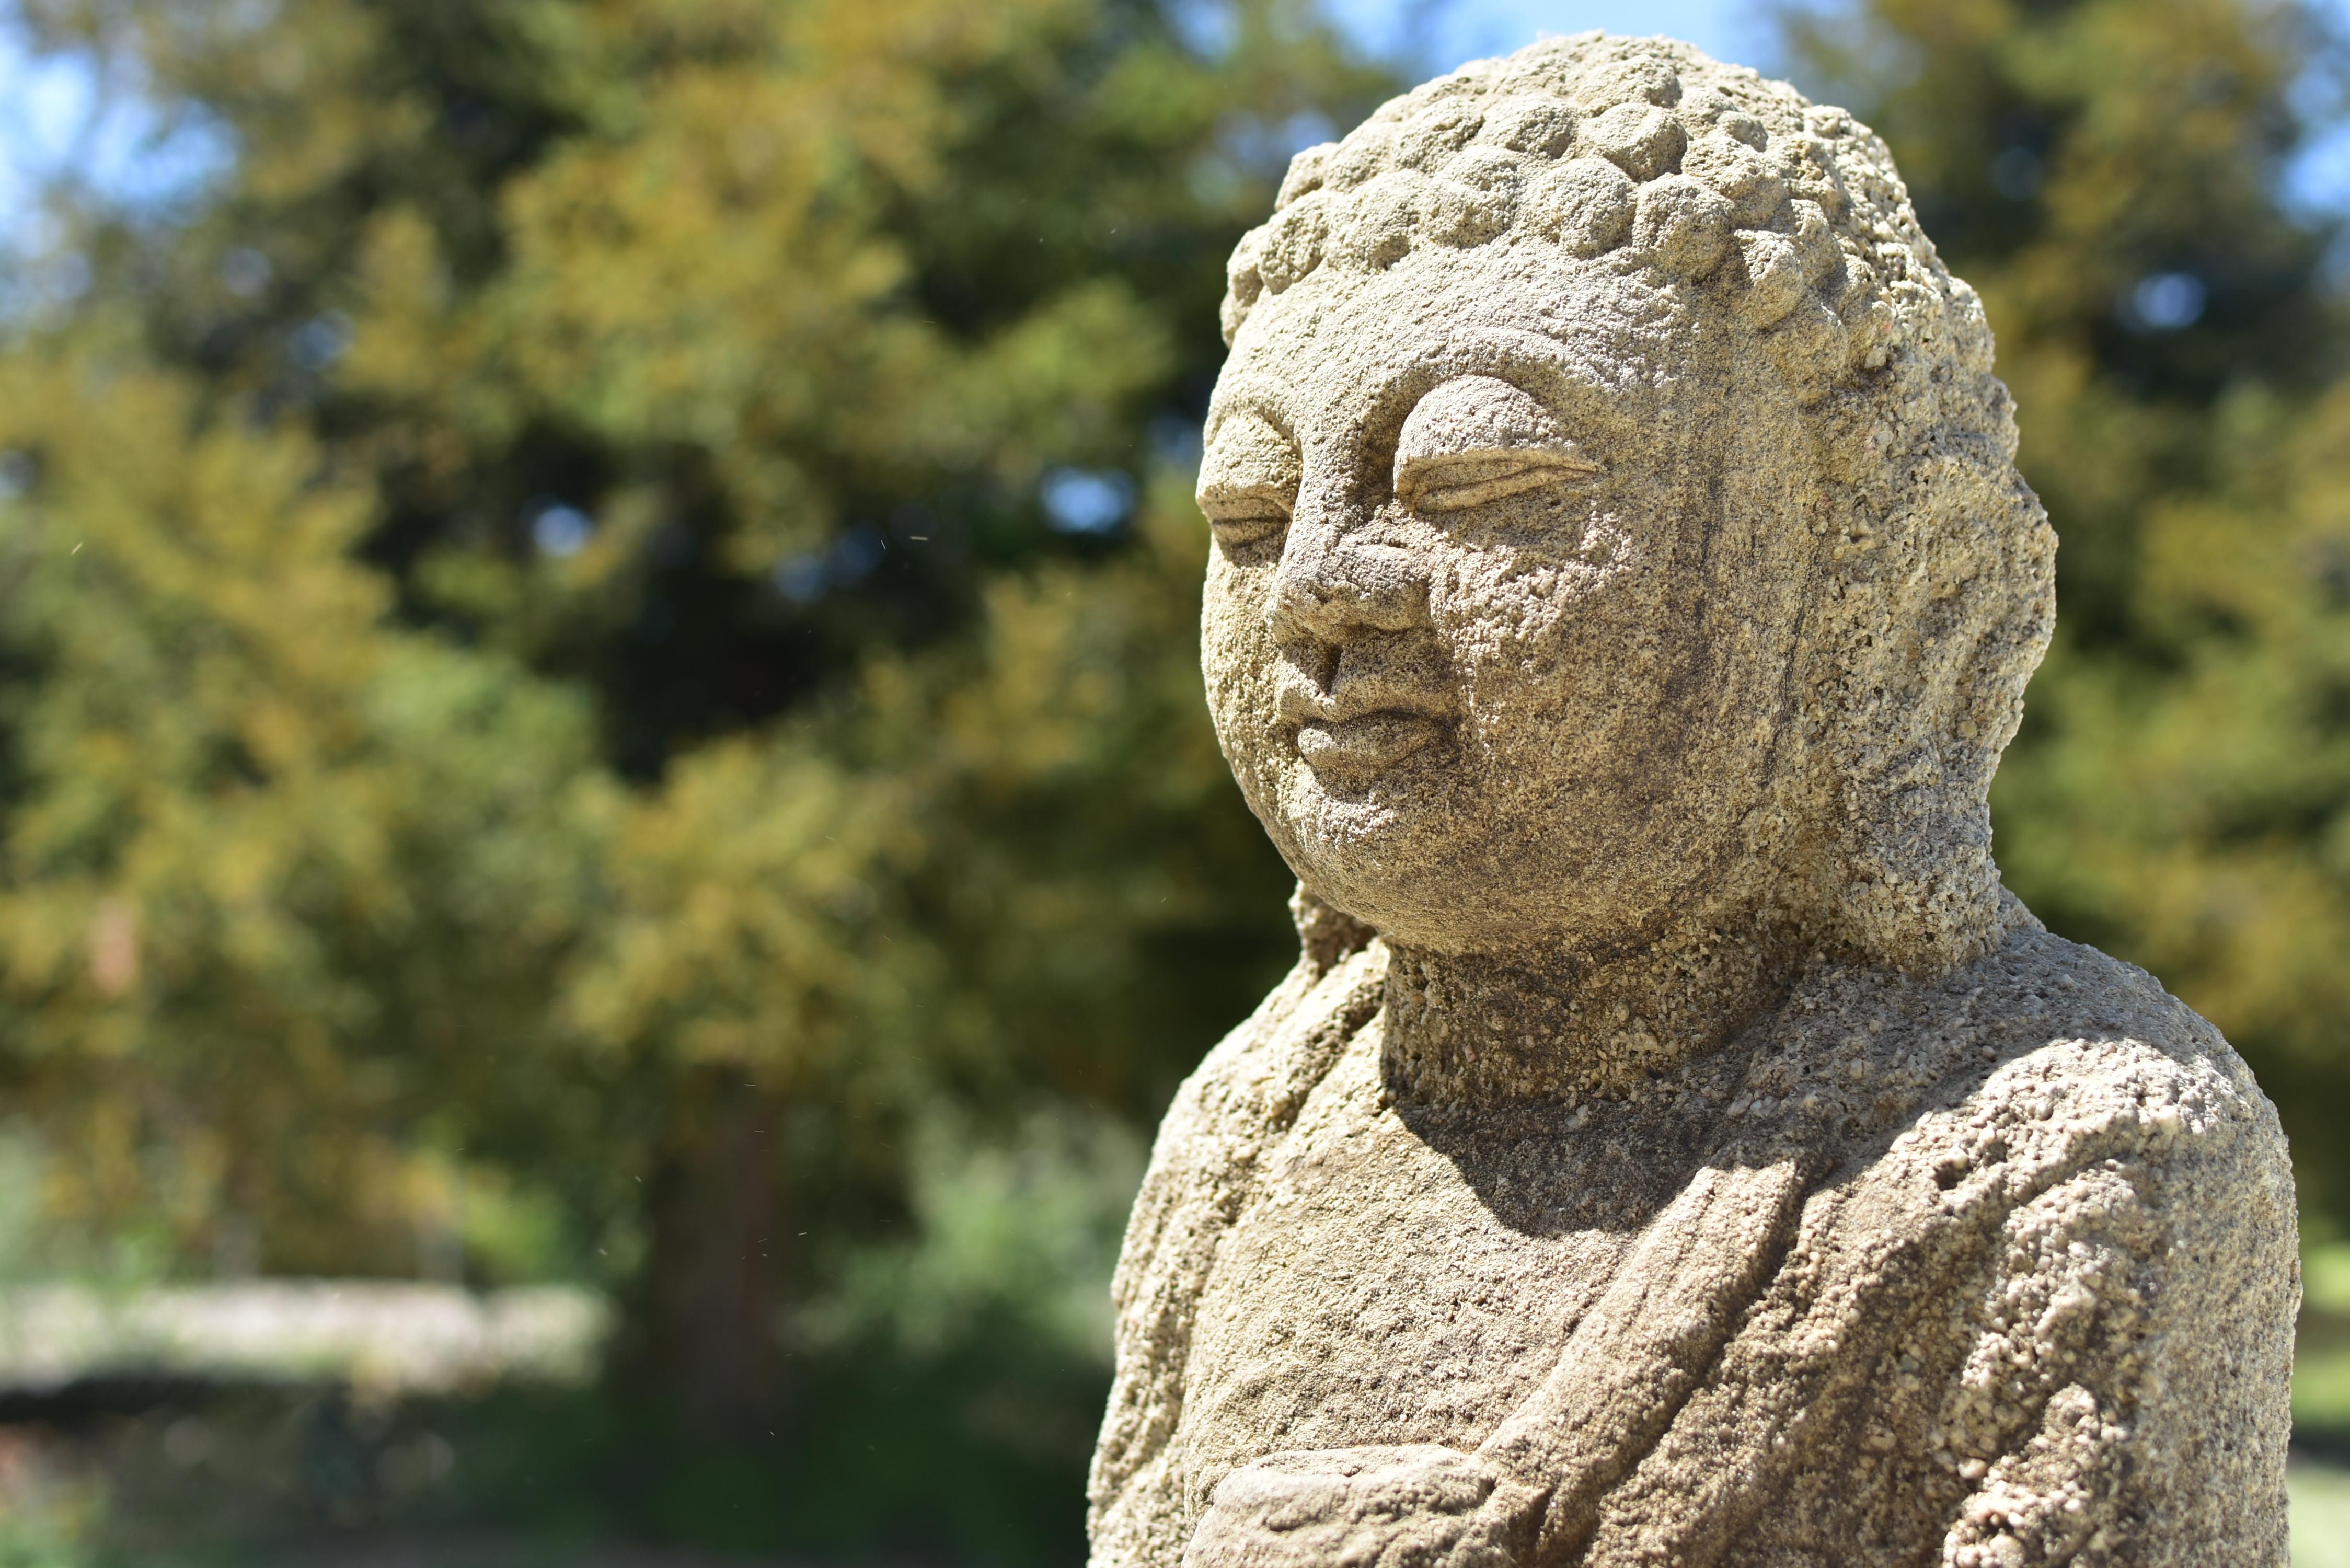 A beautiful 19th century sandstone Buddha statue. The broad face with large downcast eyes flanked by pendulous ears under tightly curled hair, with serene expression. The right hand in varada mudra expressing charity and wish granting. In the left